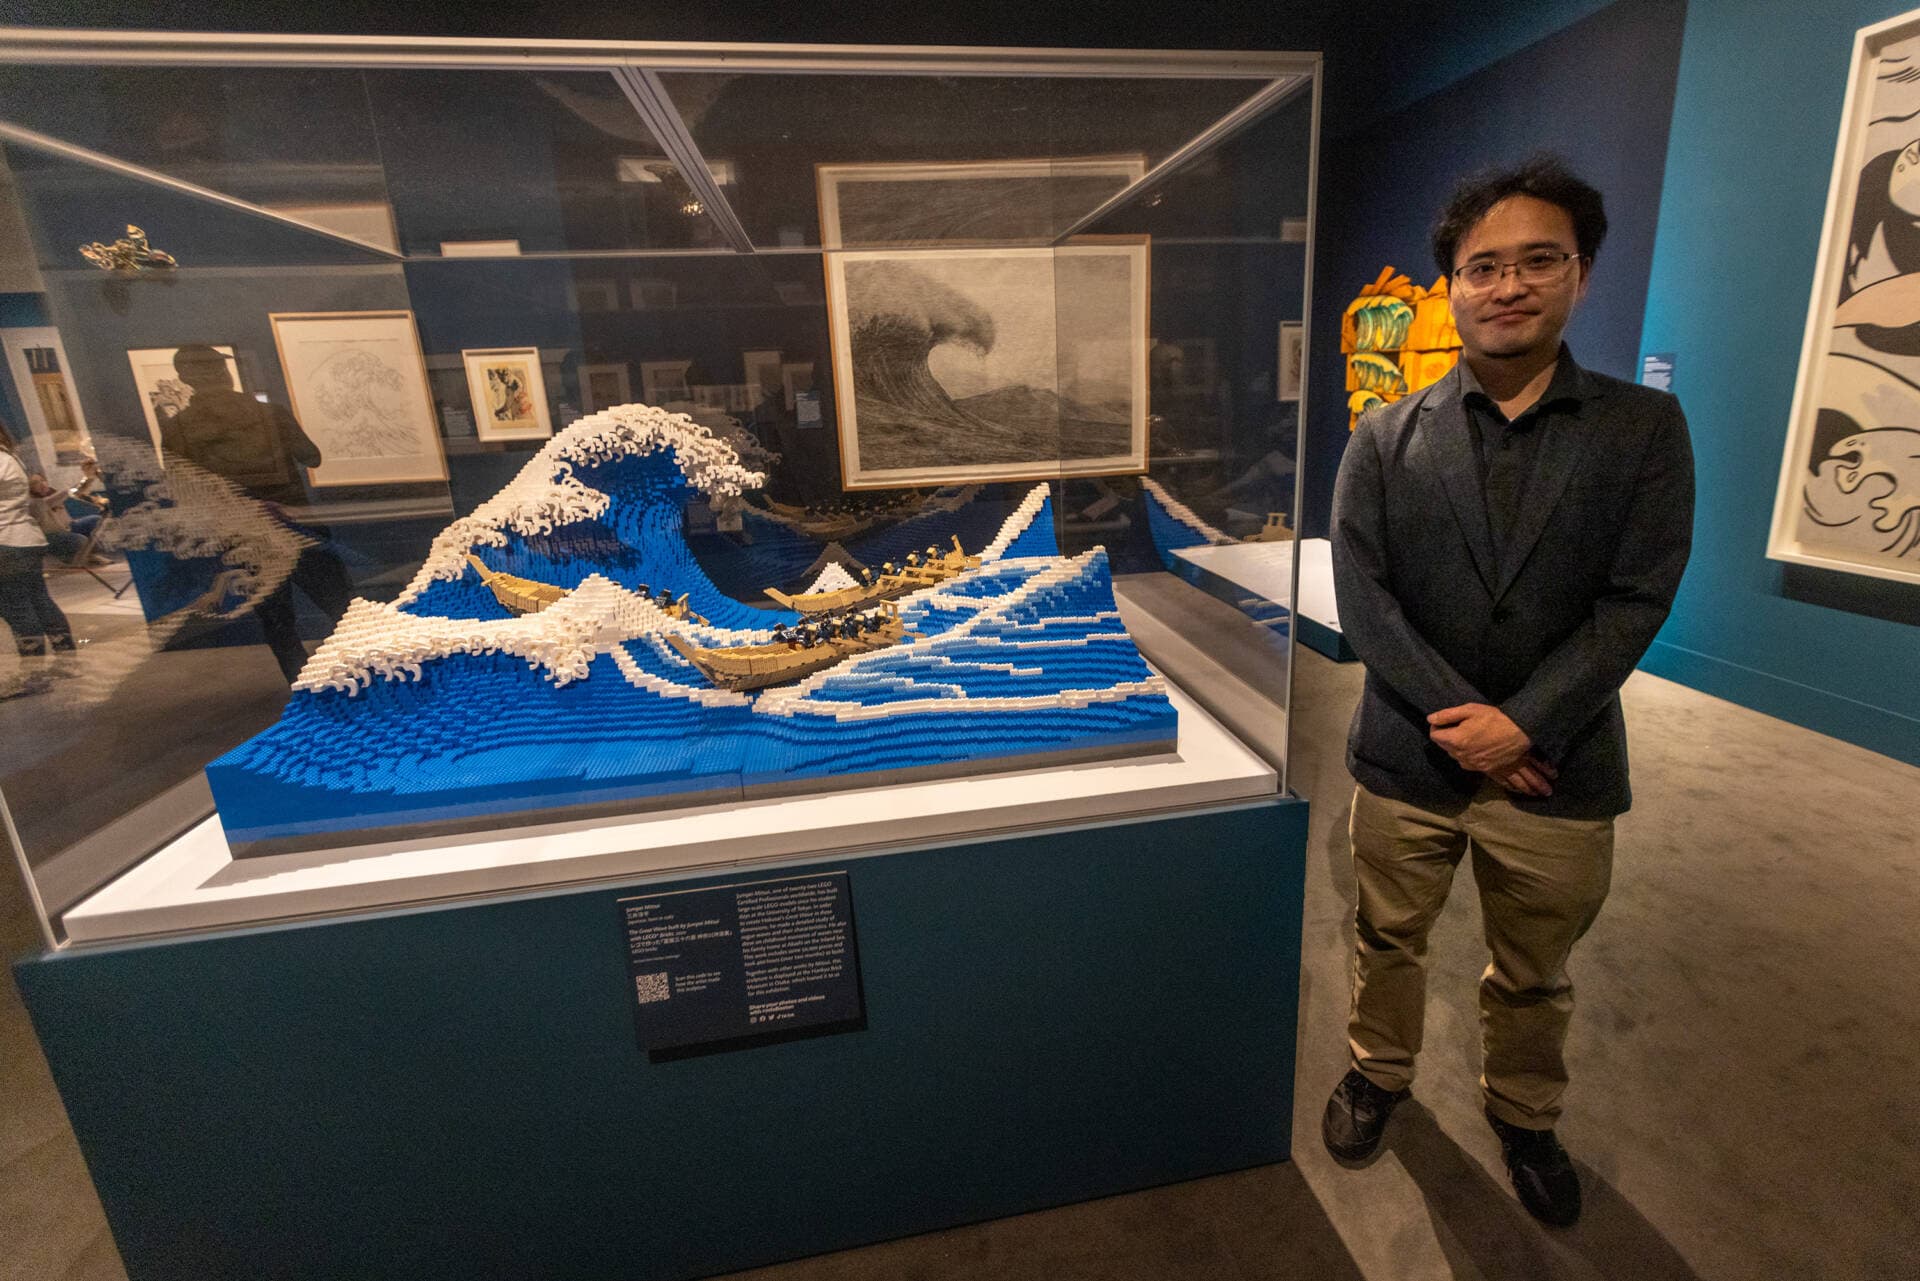 Artist Jumpei Mitsui stands with his 50,000 Lego block piece “The Great Wave built by Jumpei Mitsui with Lego Blocks” showing at the Museum of Fine Arts, Boston. (Jesse Costa/WBUR)